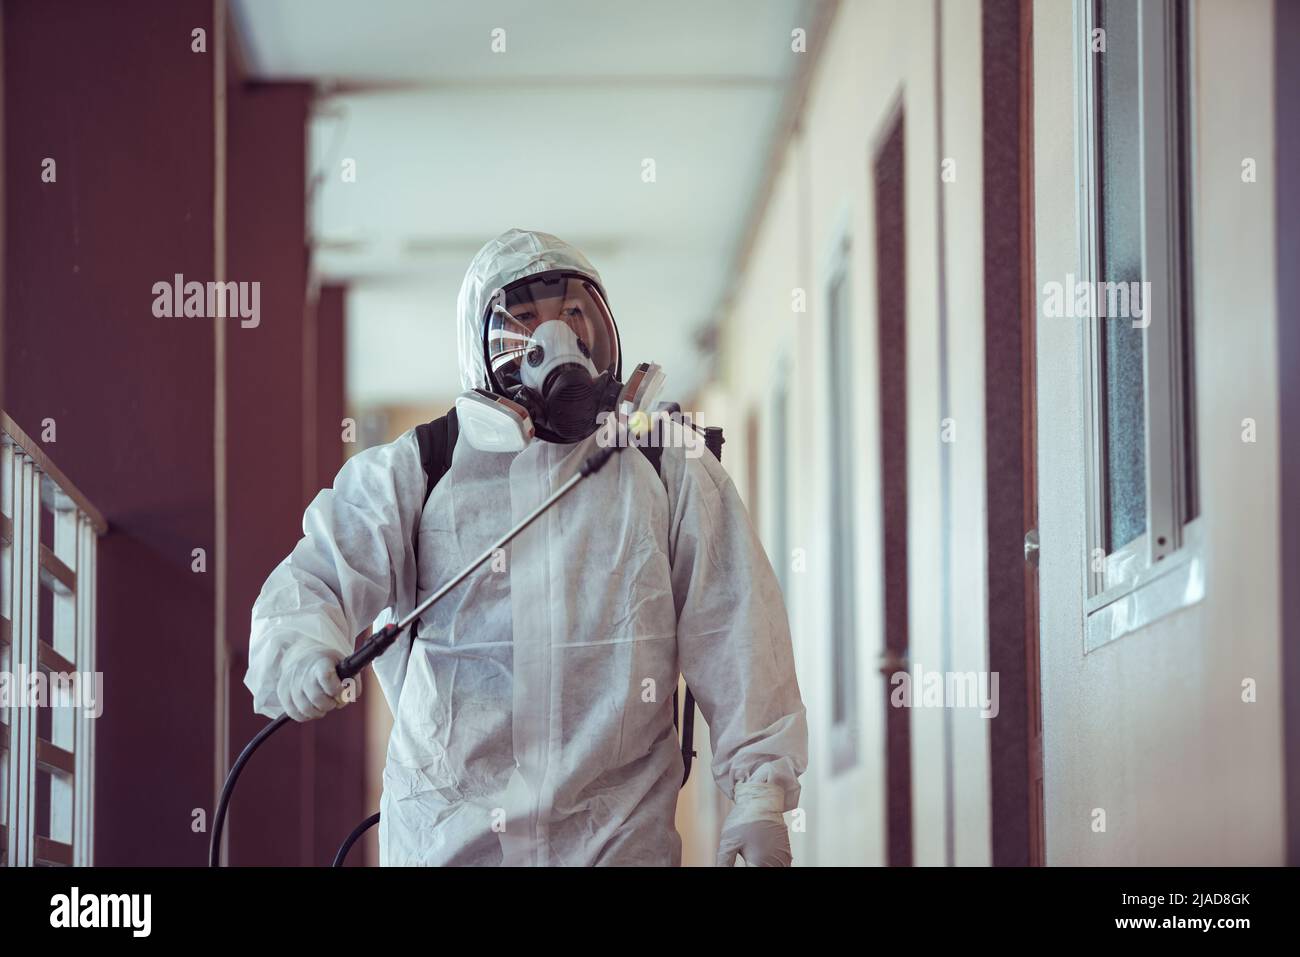 Cleaner in PPE spraying disinfectant inside a building Stock Photo